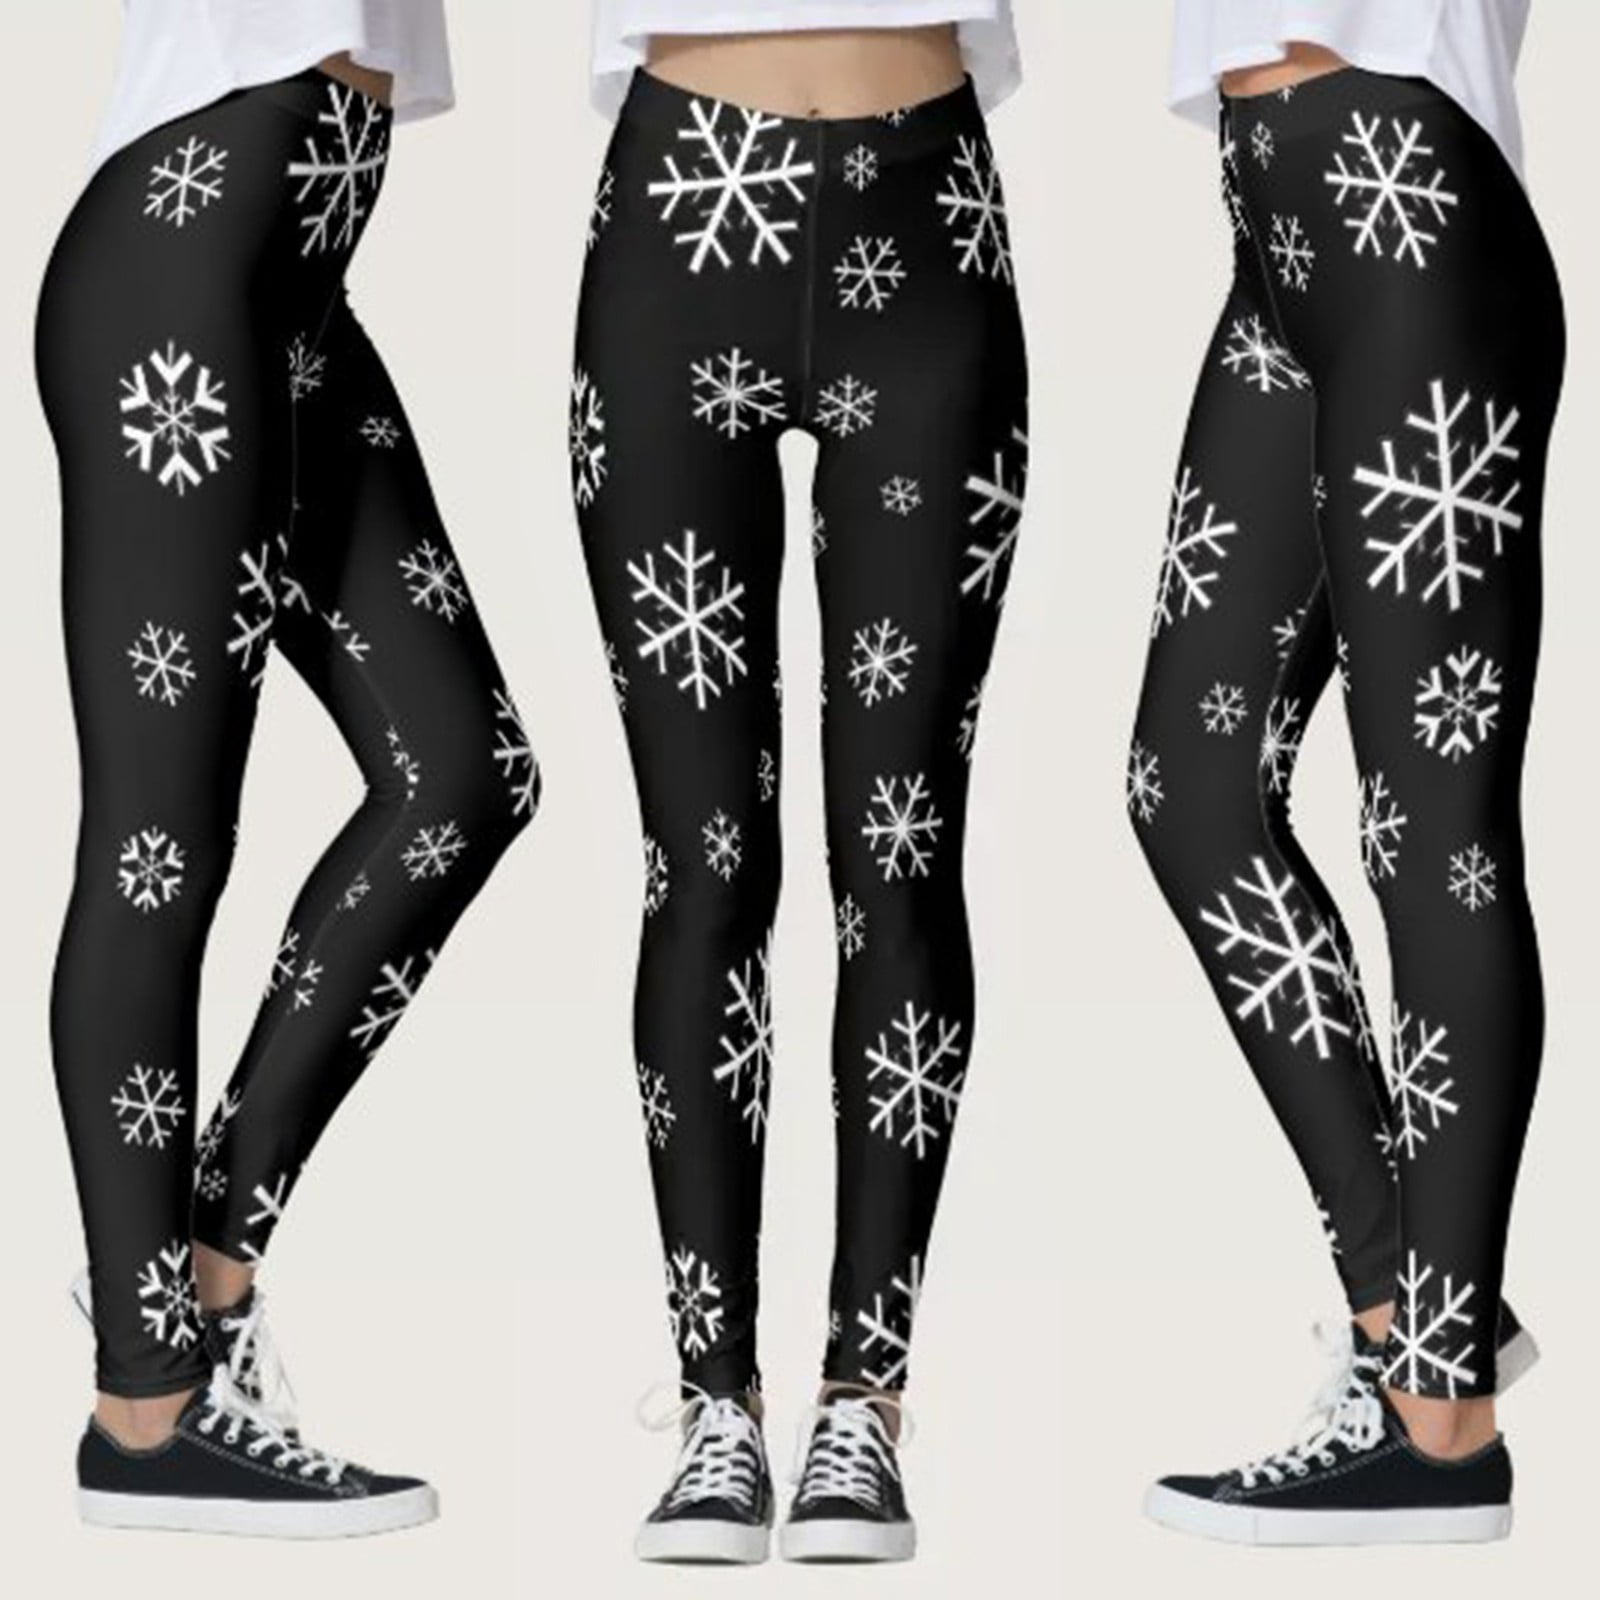  Women's Yoga Running Trousers Xmas Custom Christmas Santa Claus  Snowman Party Leggings Skinny Pants Stretchy Tights (Green-8, M) :  Clothing, Shoes & Jewelry